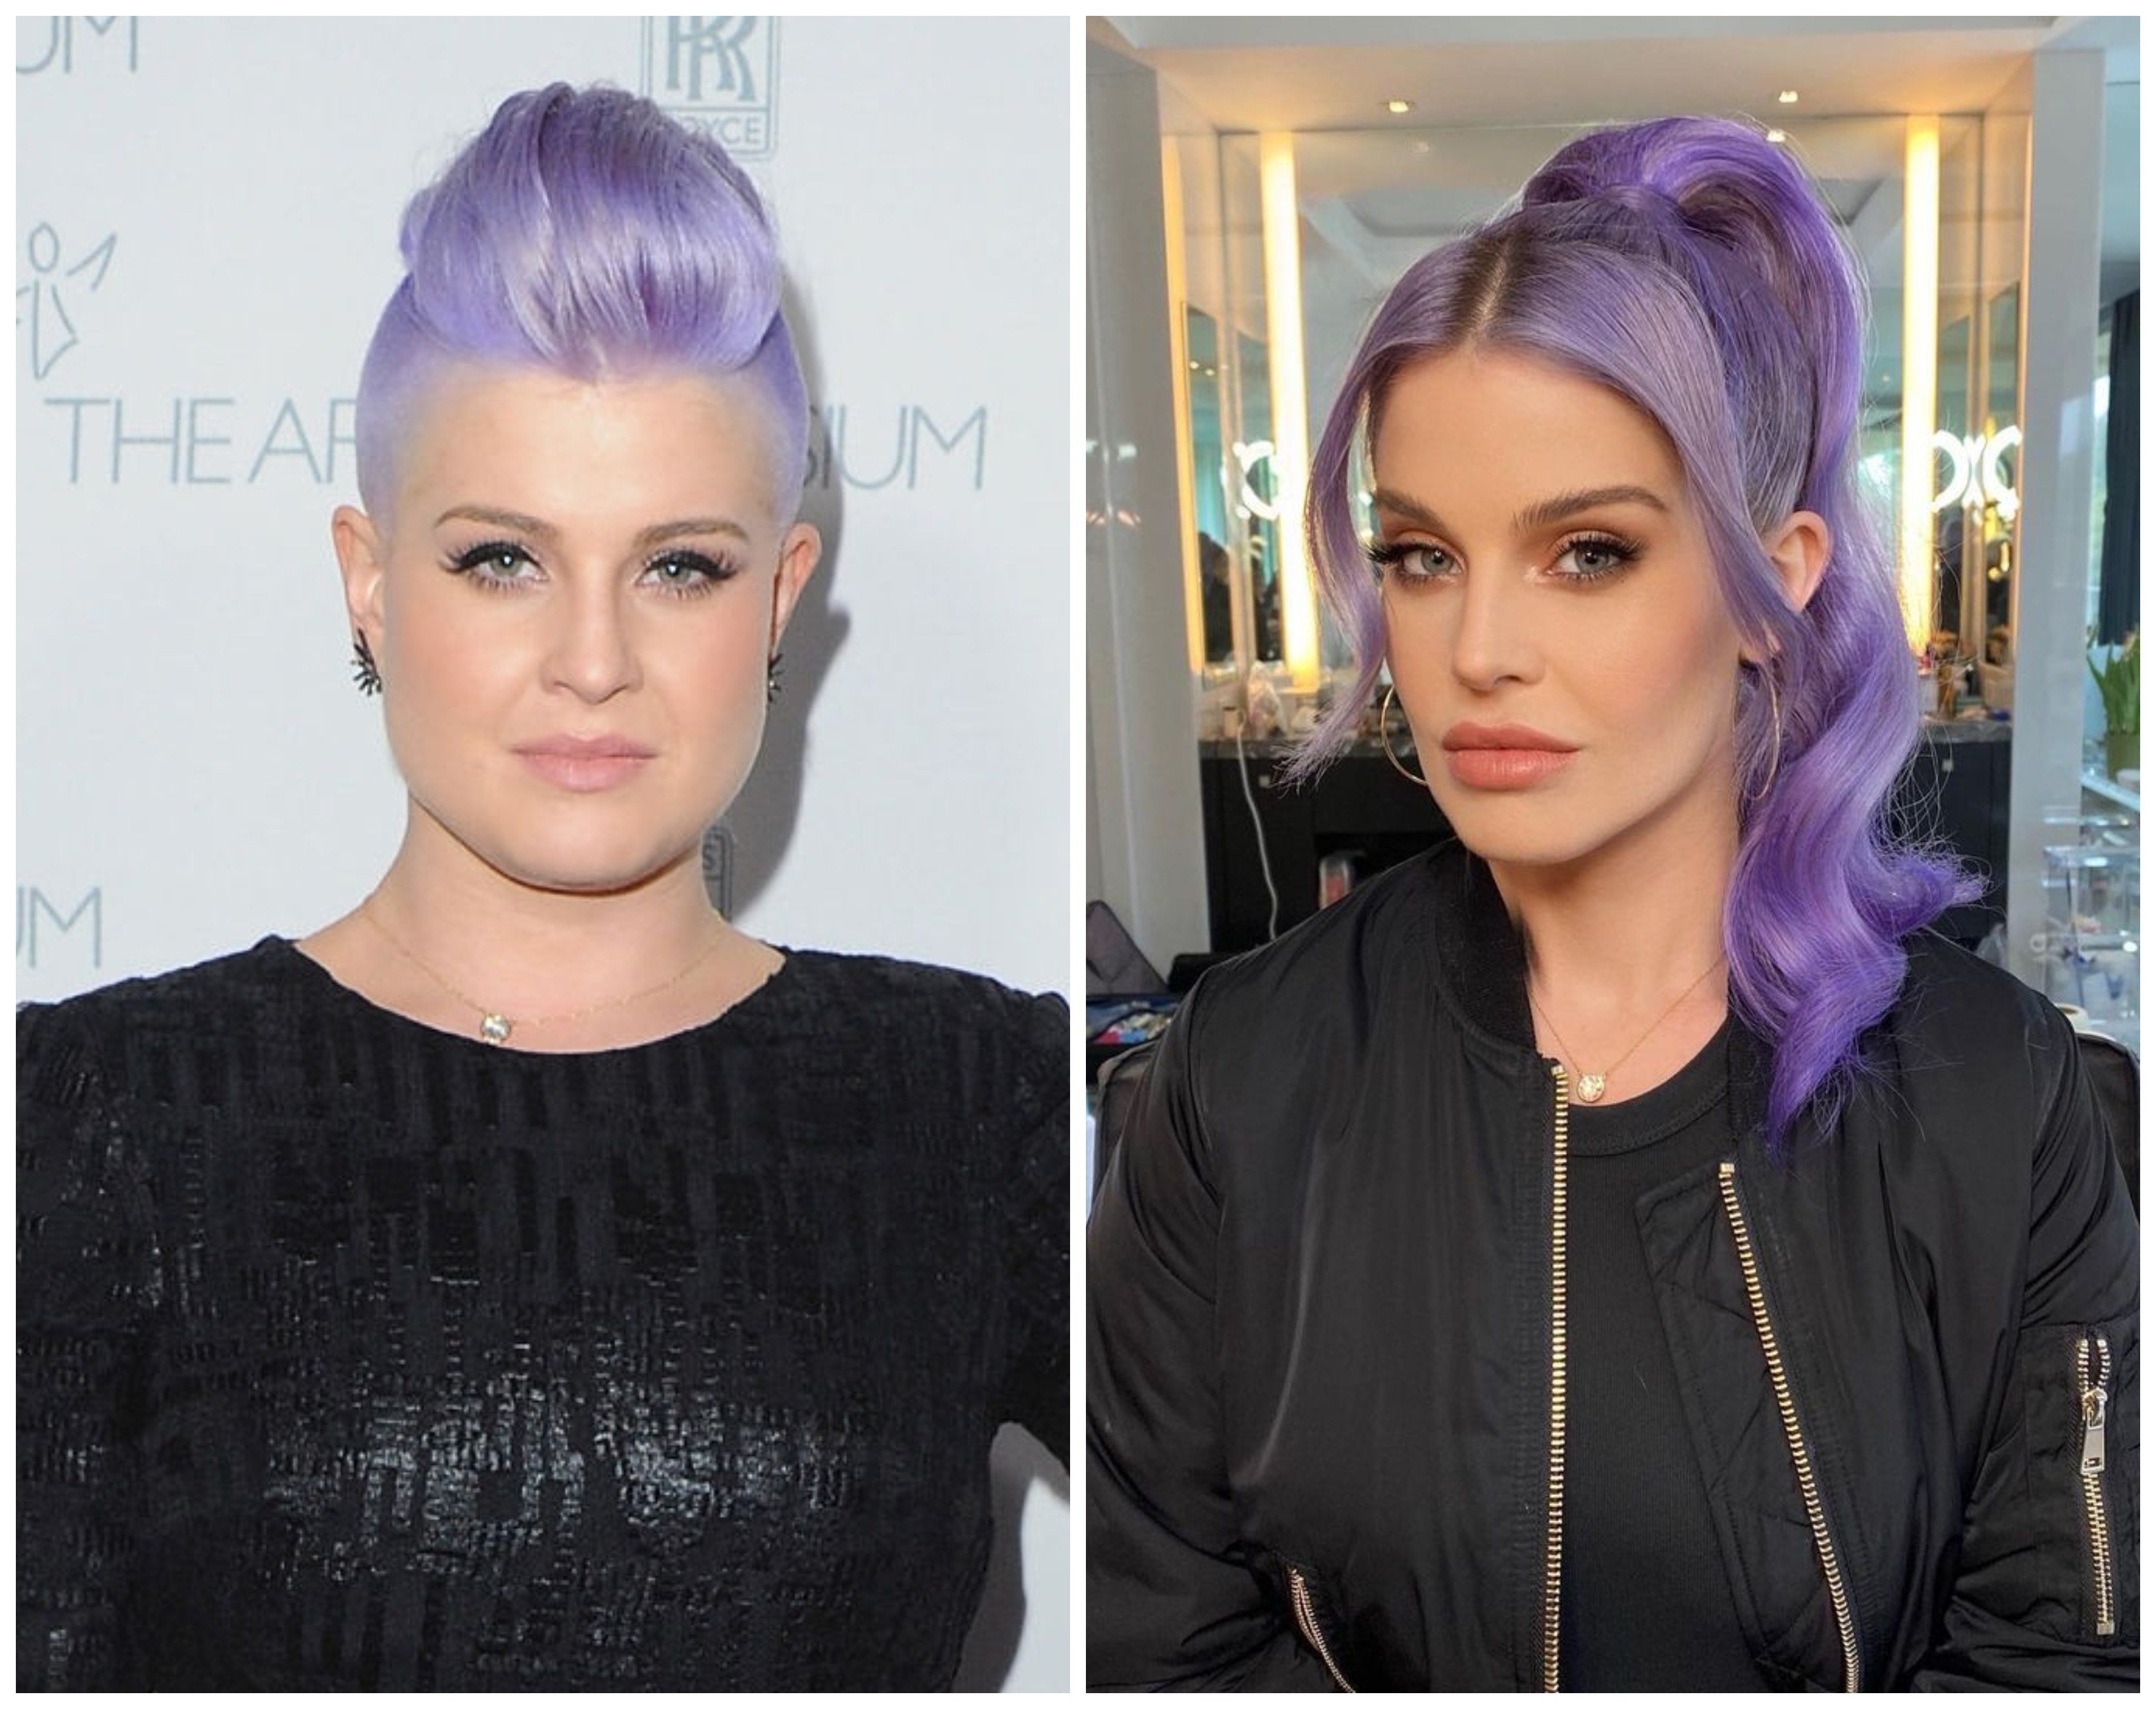 Kelly Osbourne’s transformation, before and after. Photos: Getty Images, @kellyosbourne/Instagram